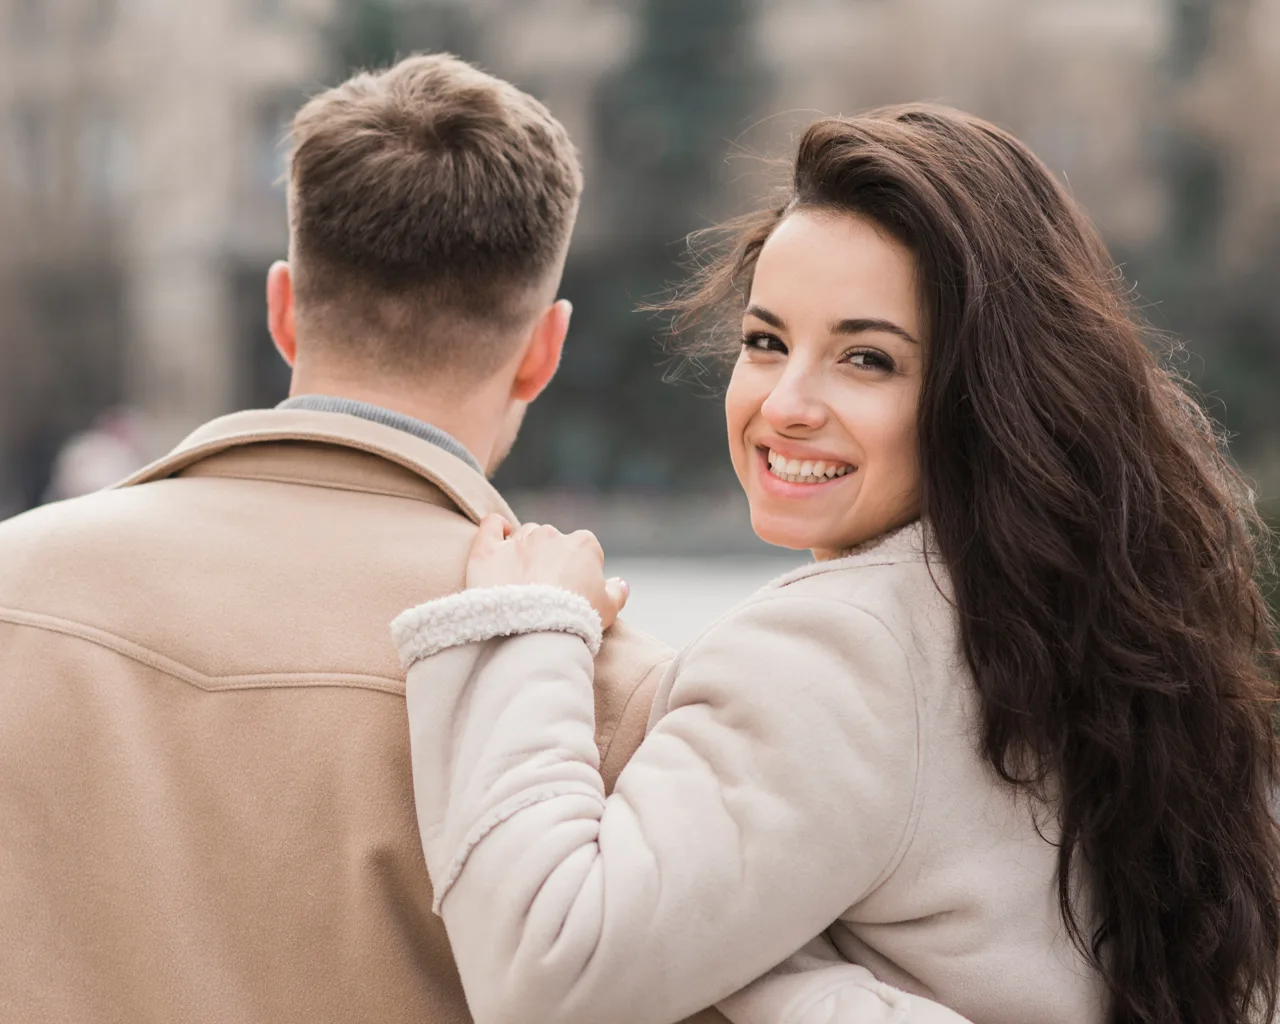 About Loving couple smiling image